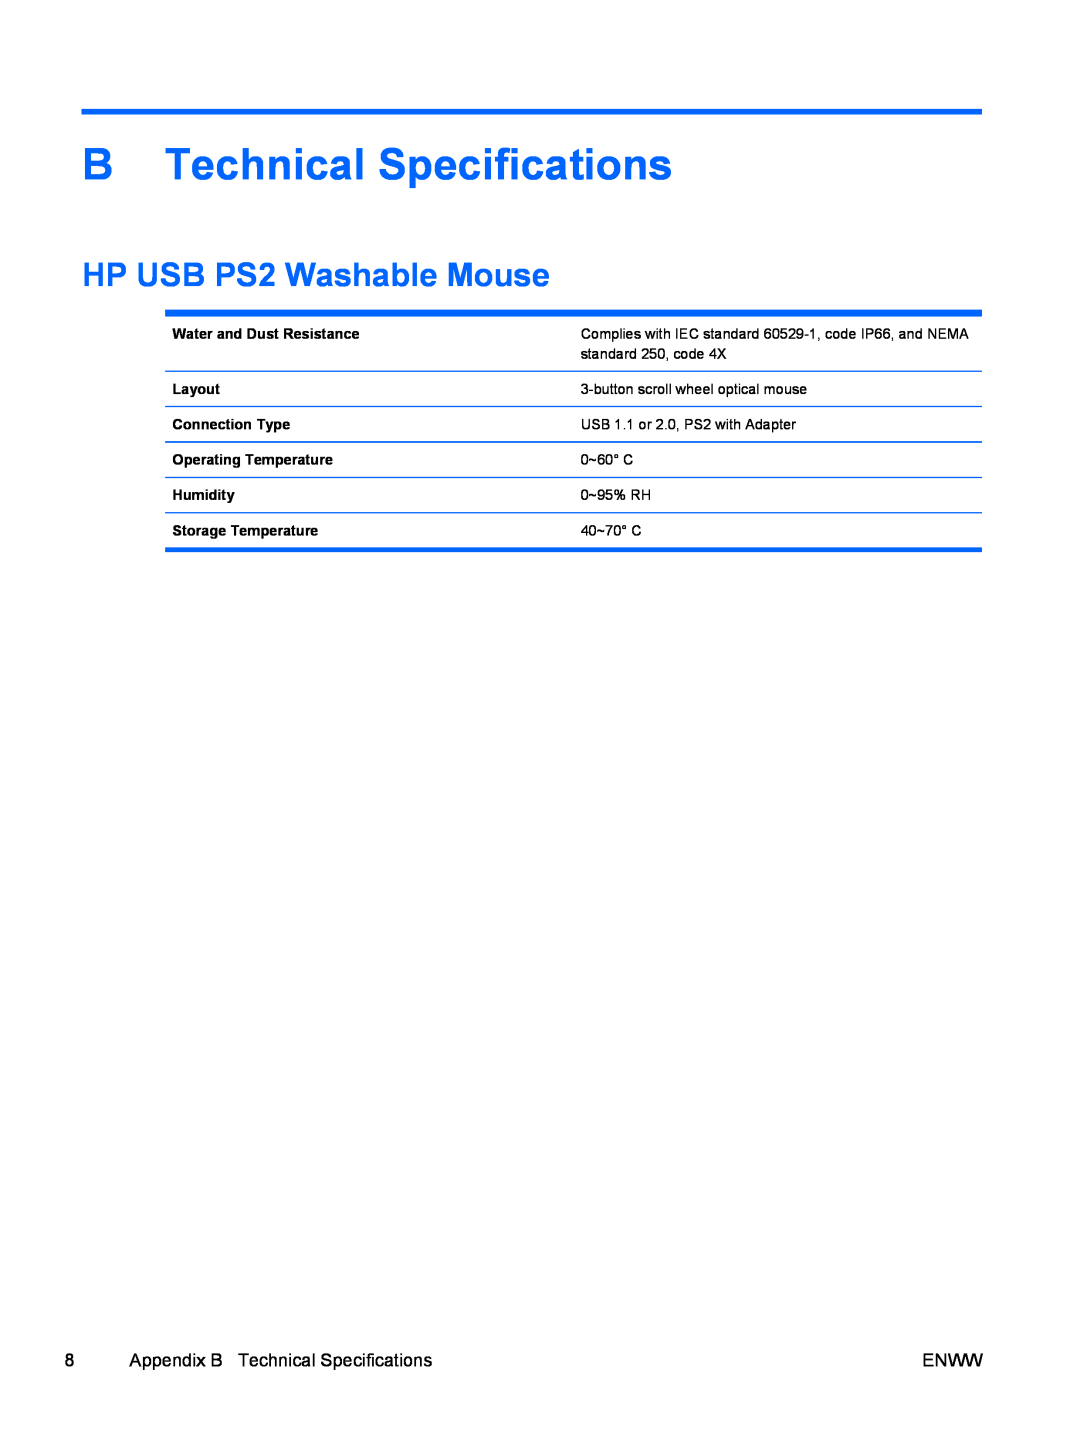 HP 8000 tower B Technical Specifications, HP USB PS2 Washable Mouse, Water and Dust Resistance, Layout, Connection Type 